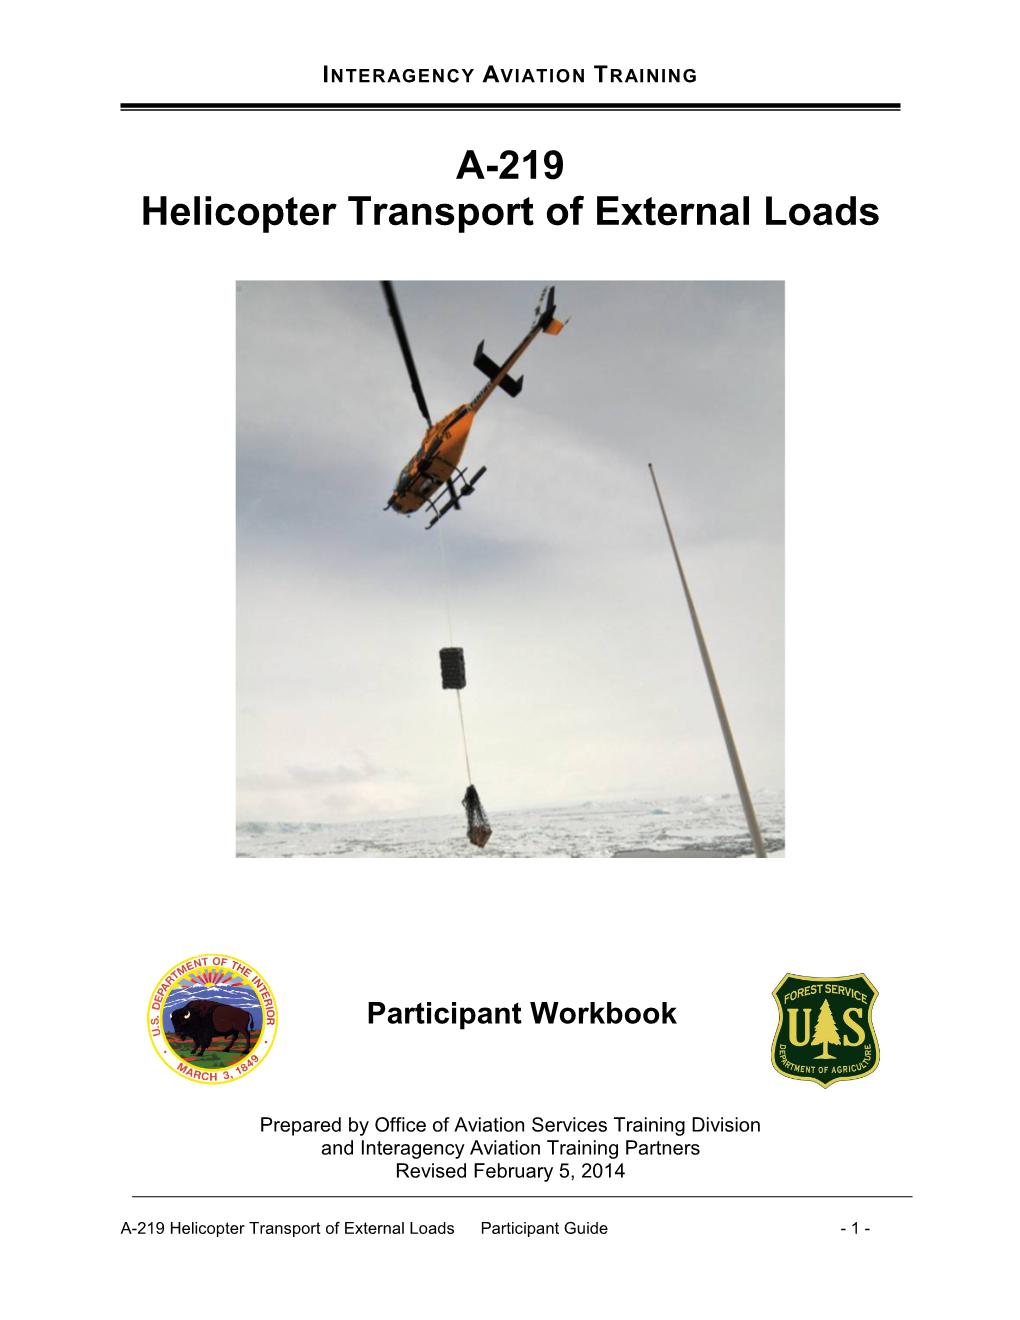 A-219 Helicopter Transport of External Loads